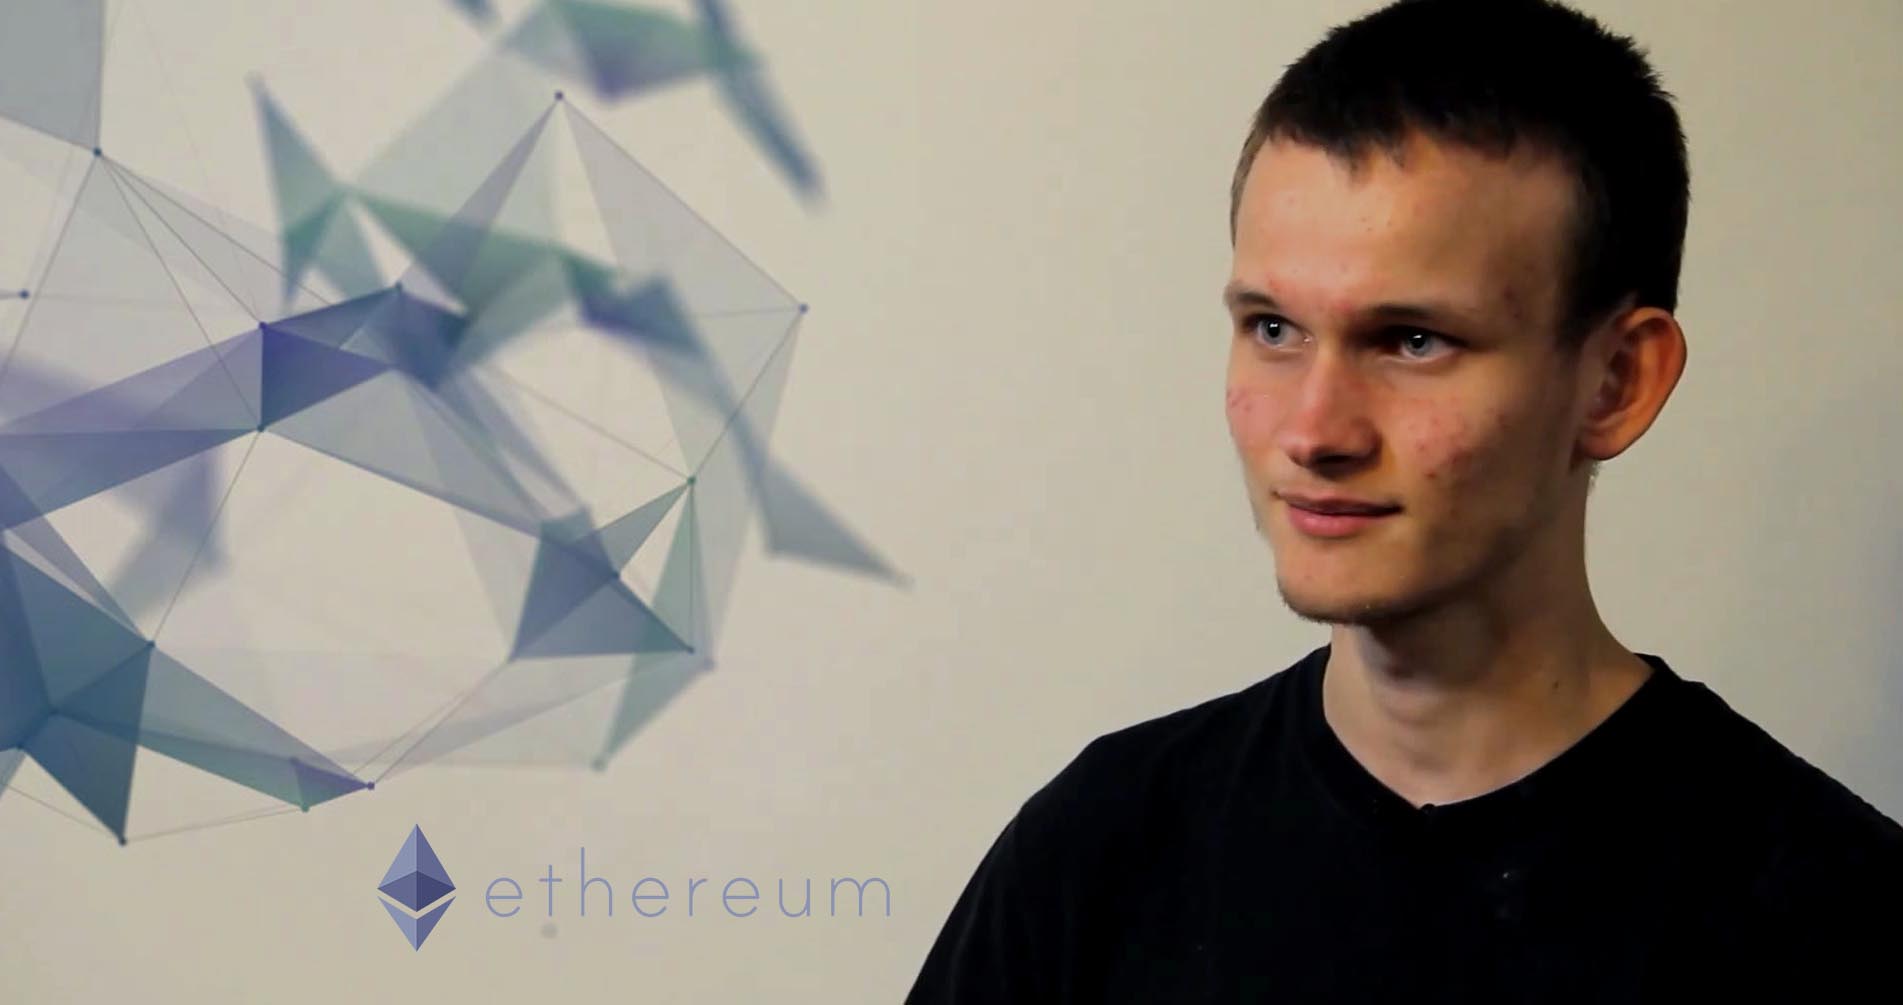 Picture of Ethereum founder Vitalik Buterin with Ethereum's logo next to him